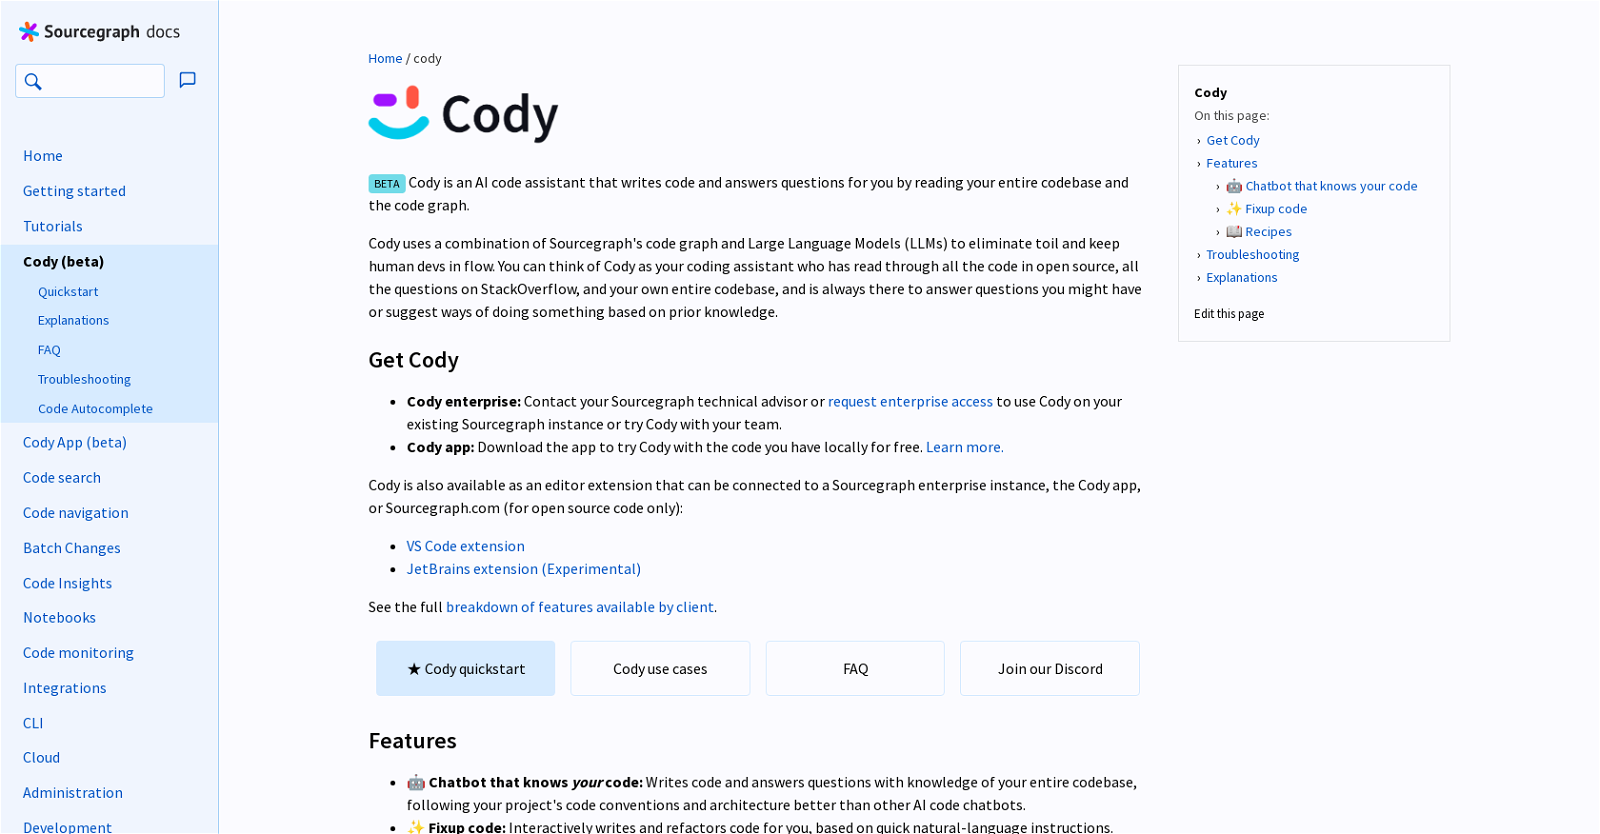 Sourcegraph Cody website